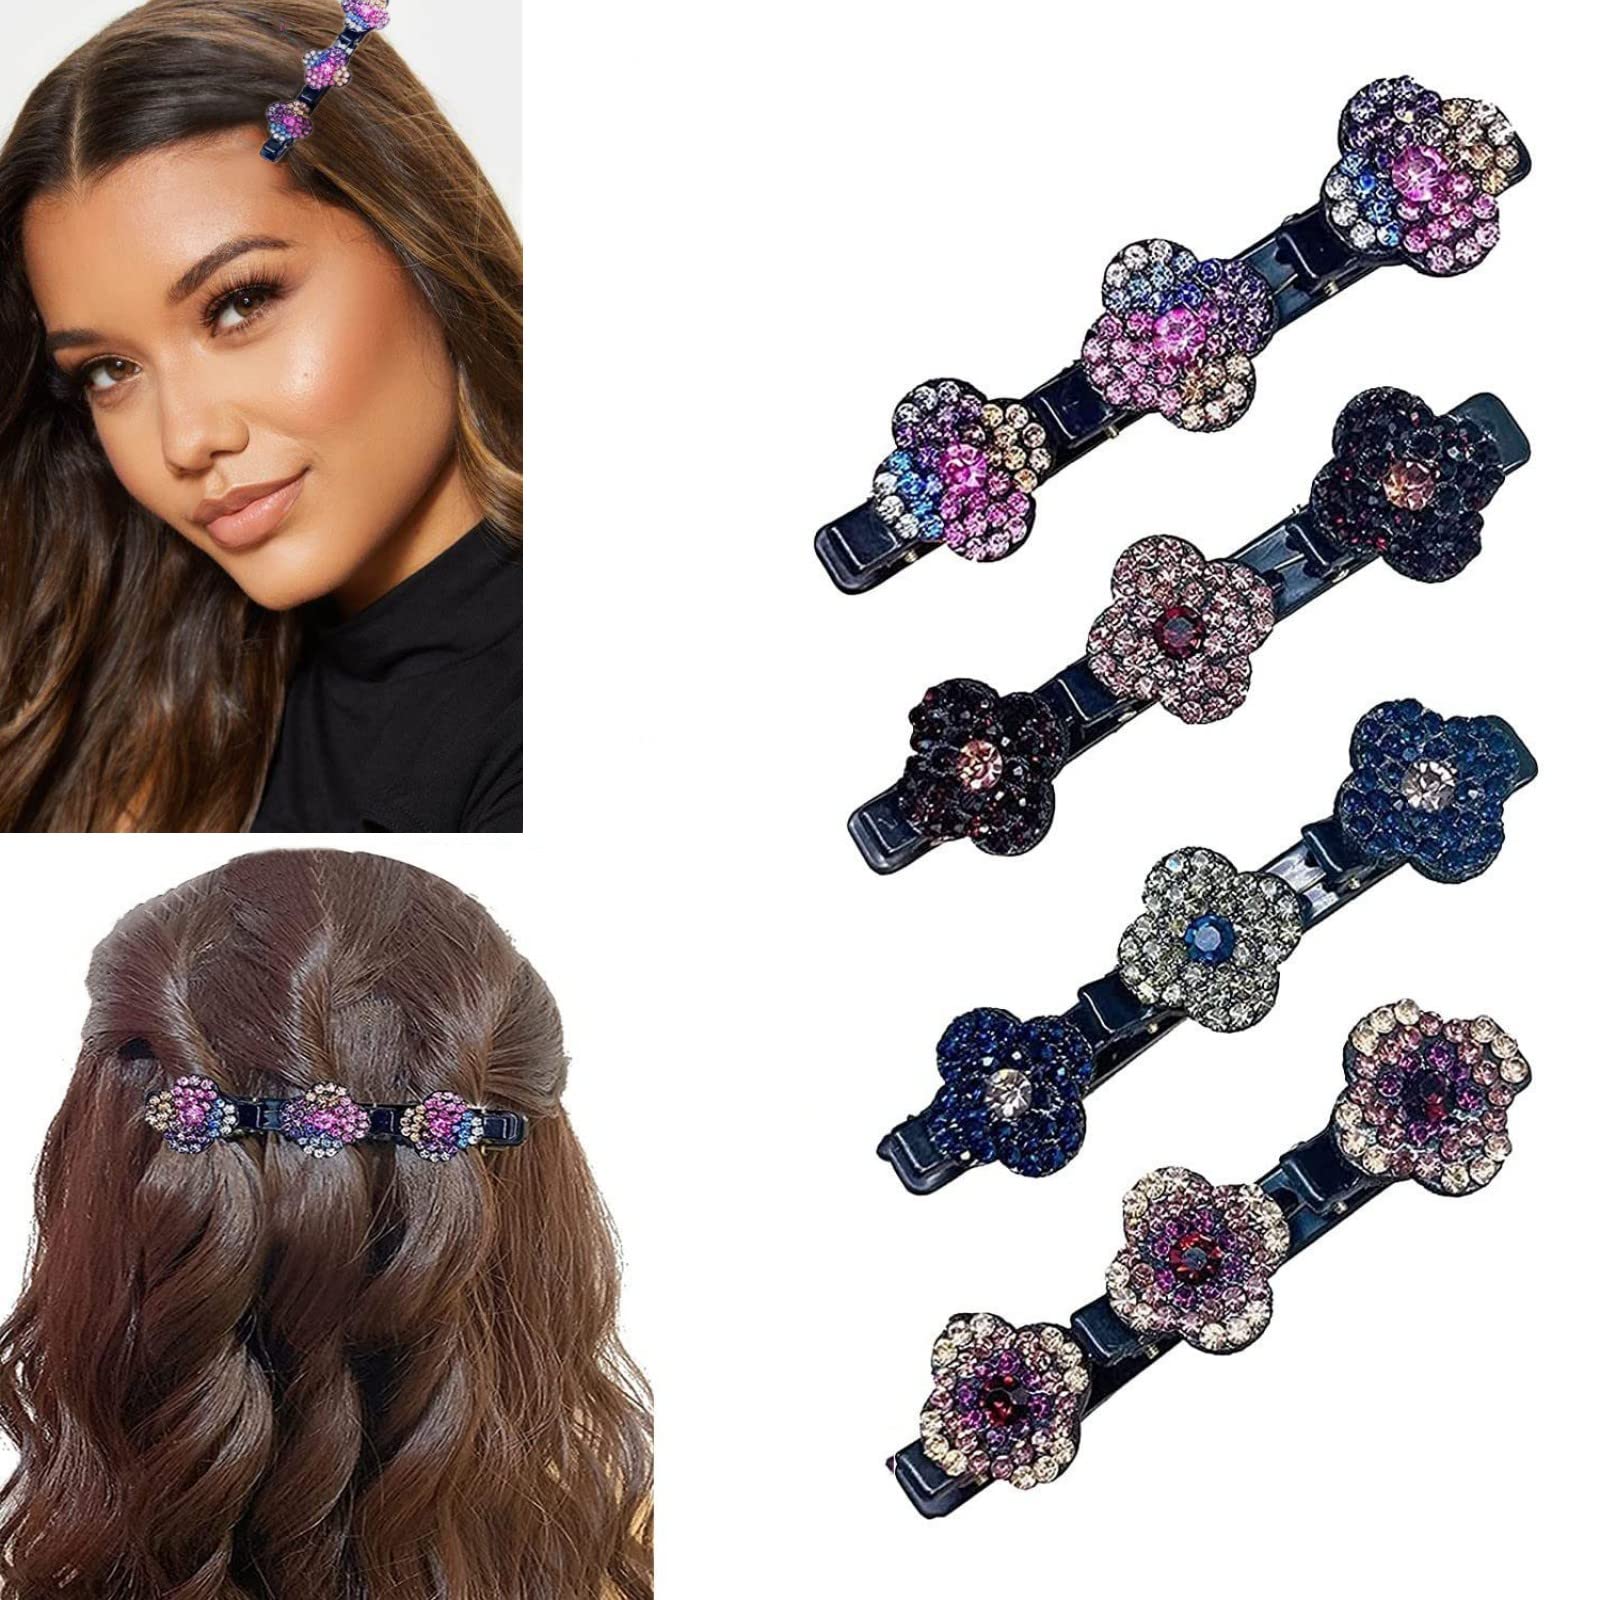 4PC Sparkling Crystals Hair Clips For Women Hair Barrettes For Women  Four-Leaf Flower Hair Clip For Styling Sectioning With 3 Small Clips Hair  Accessories For Girls Small Hair Clips For Thick Hair.